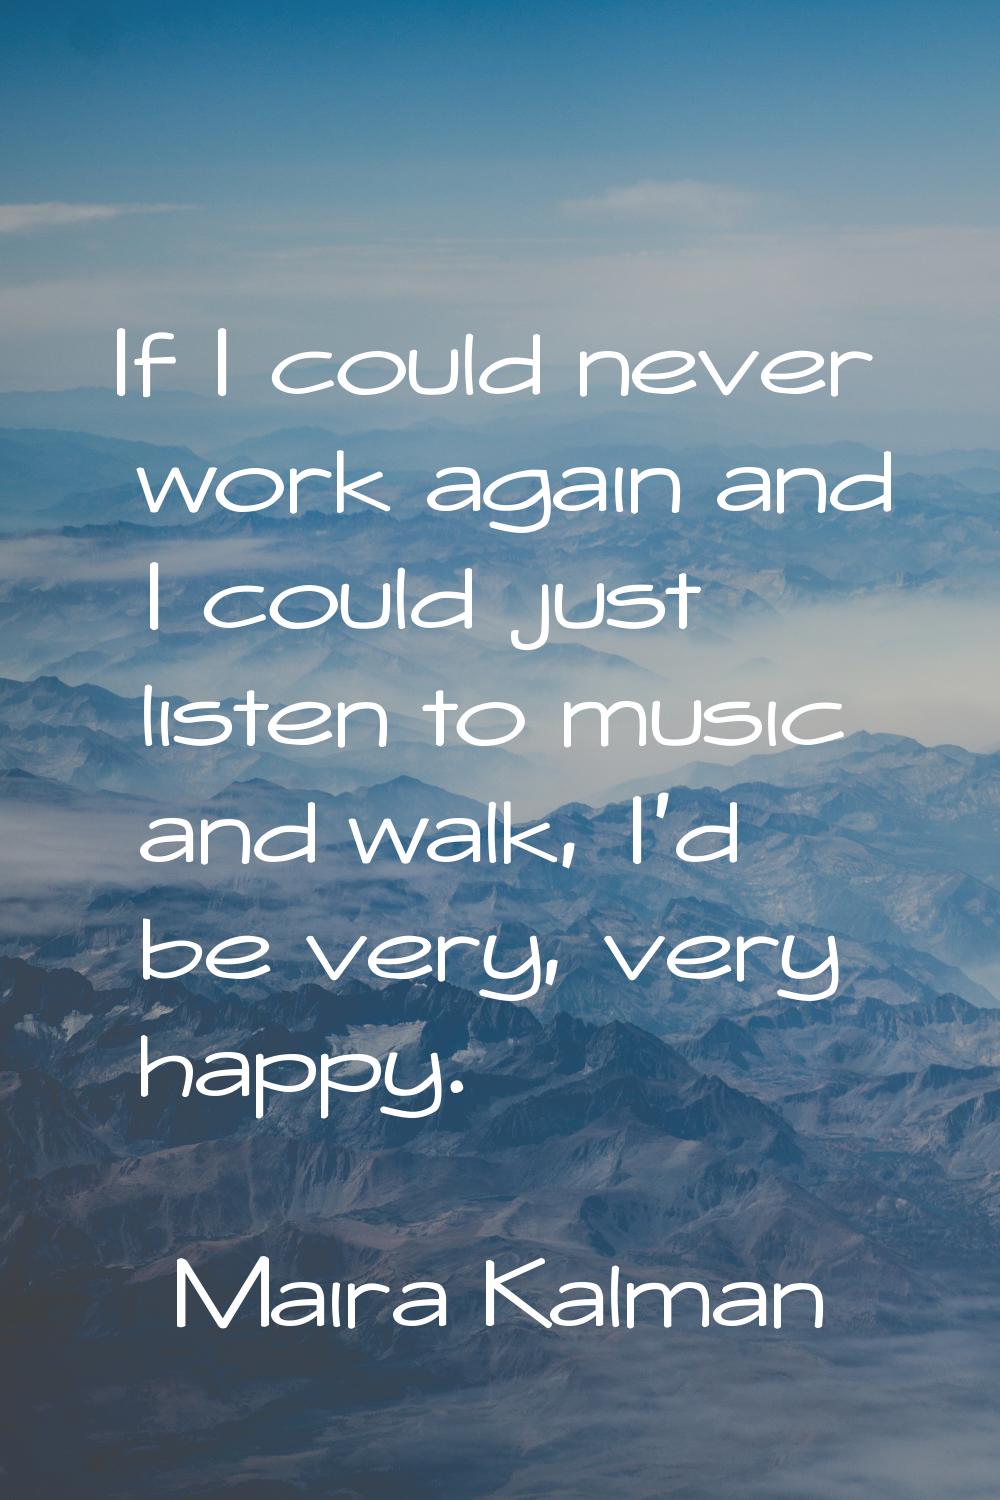 If I could never work again and I could just listen to music and walk, I'd be very, very happy.